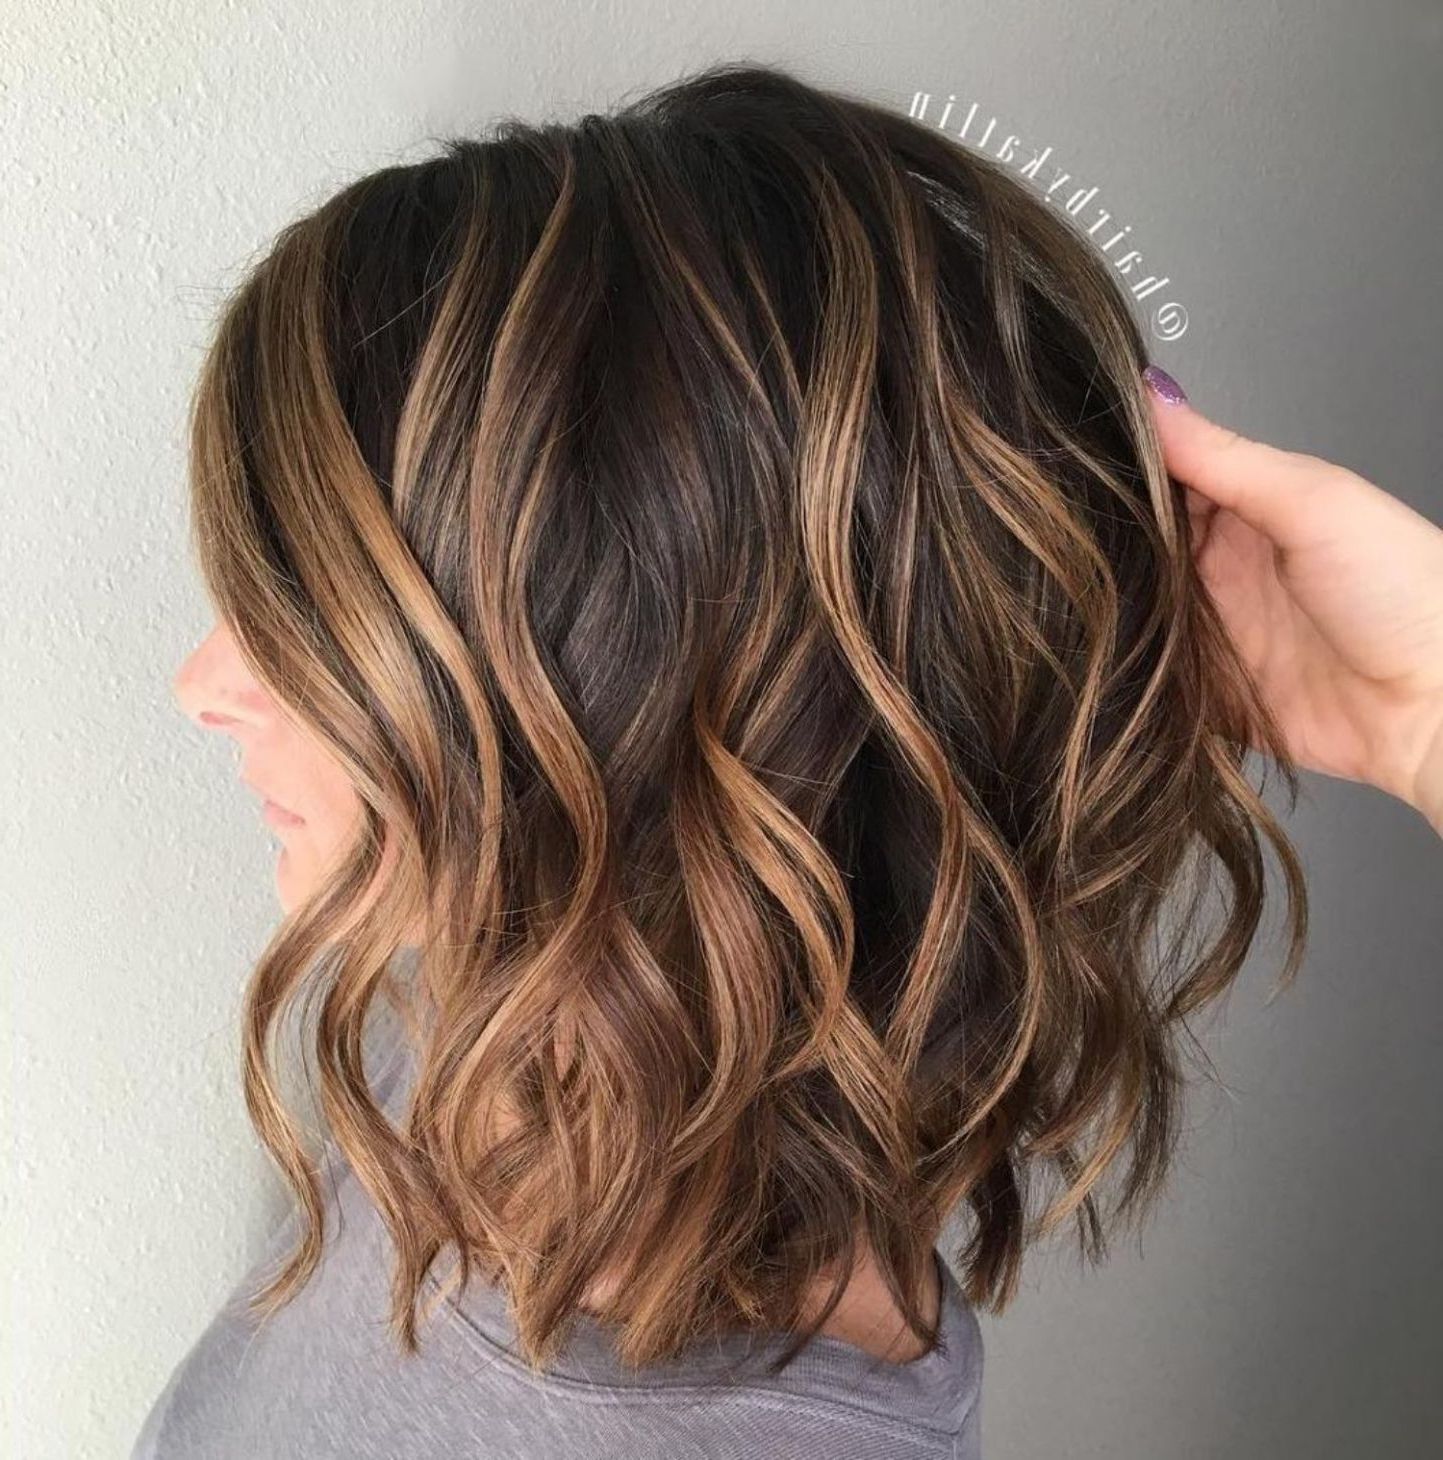 70 Brightest Medium Layered Haircuts To Light You Up In 2019 For Favorite Shoulder Length Wavy Layered Hairstyles With Highlights (View 4 of 20)